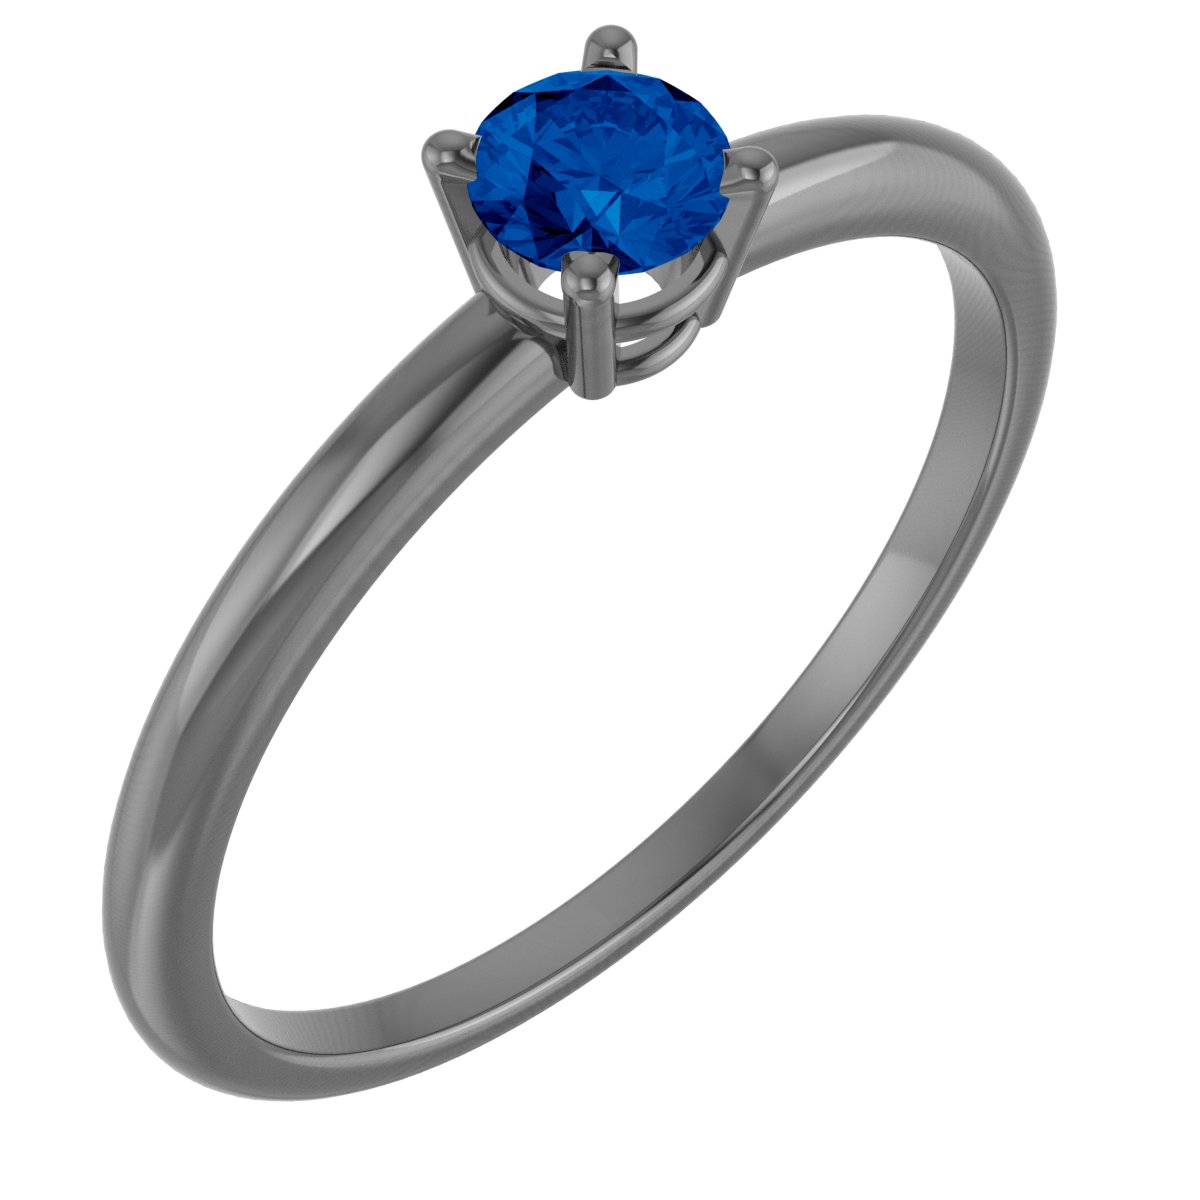 14K Yellow Natural Blue Sapphire Ring